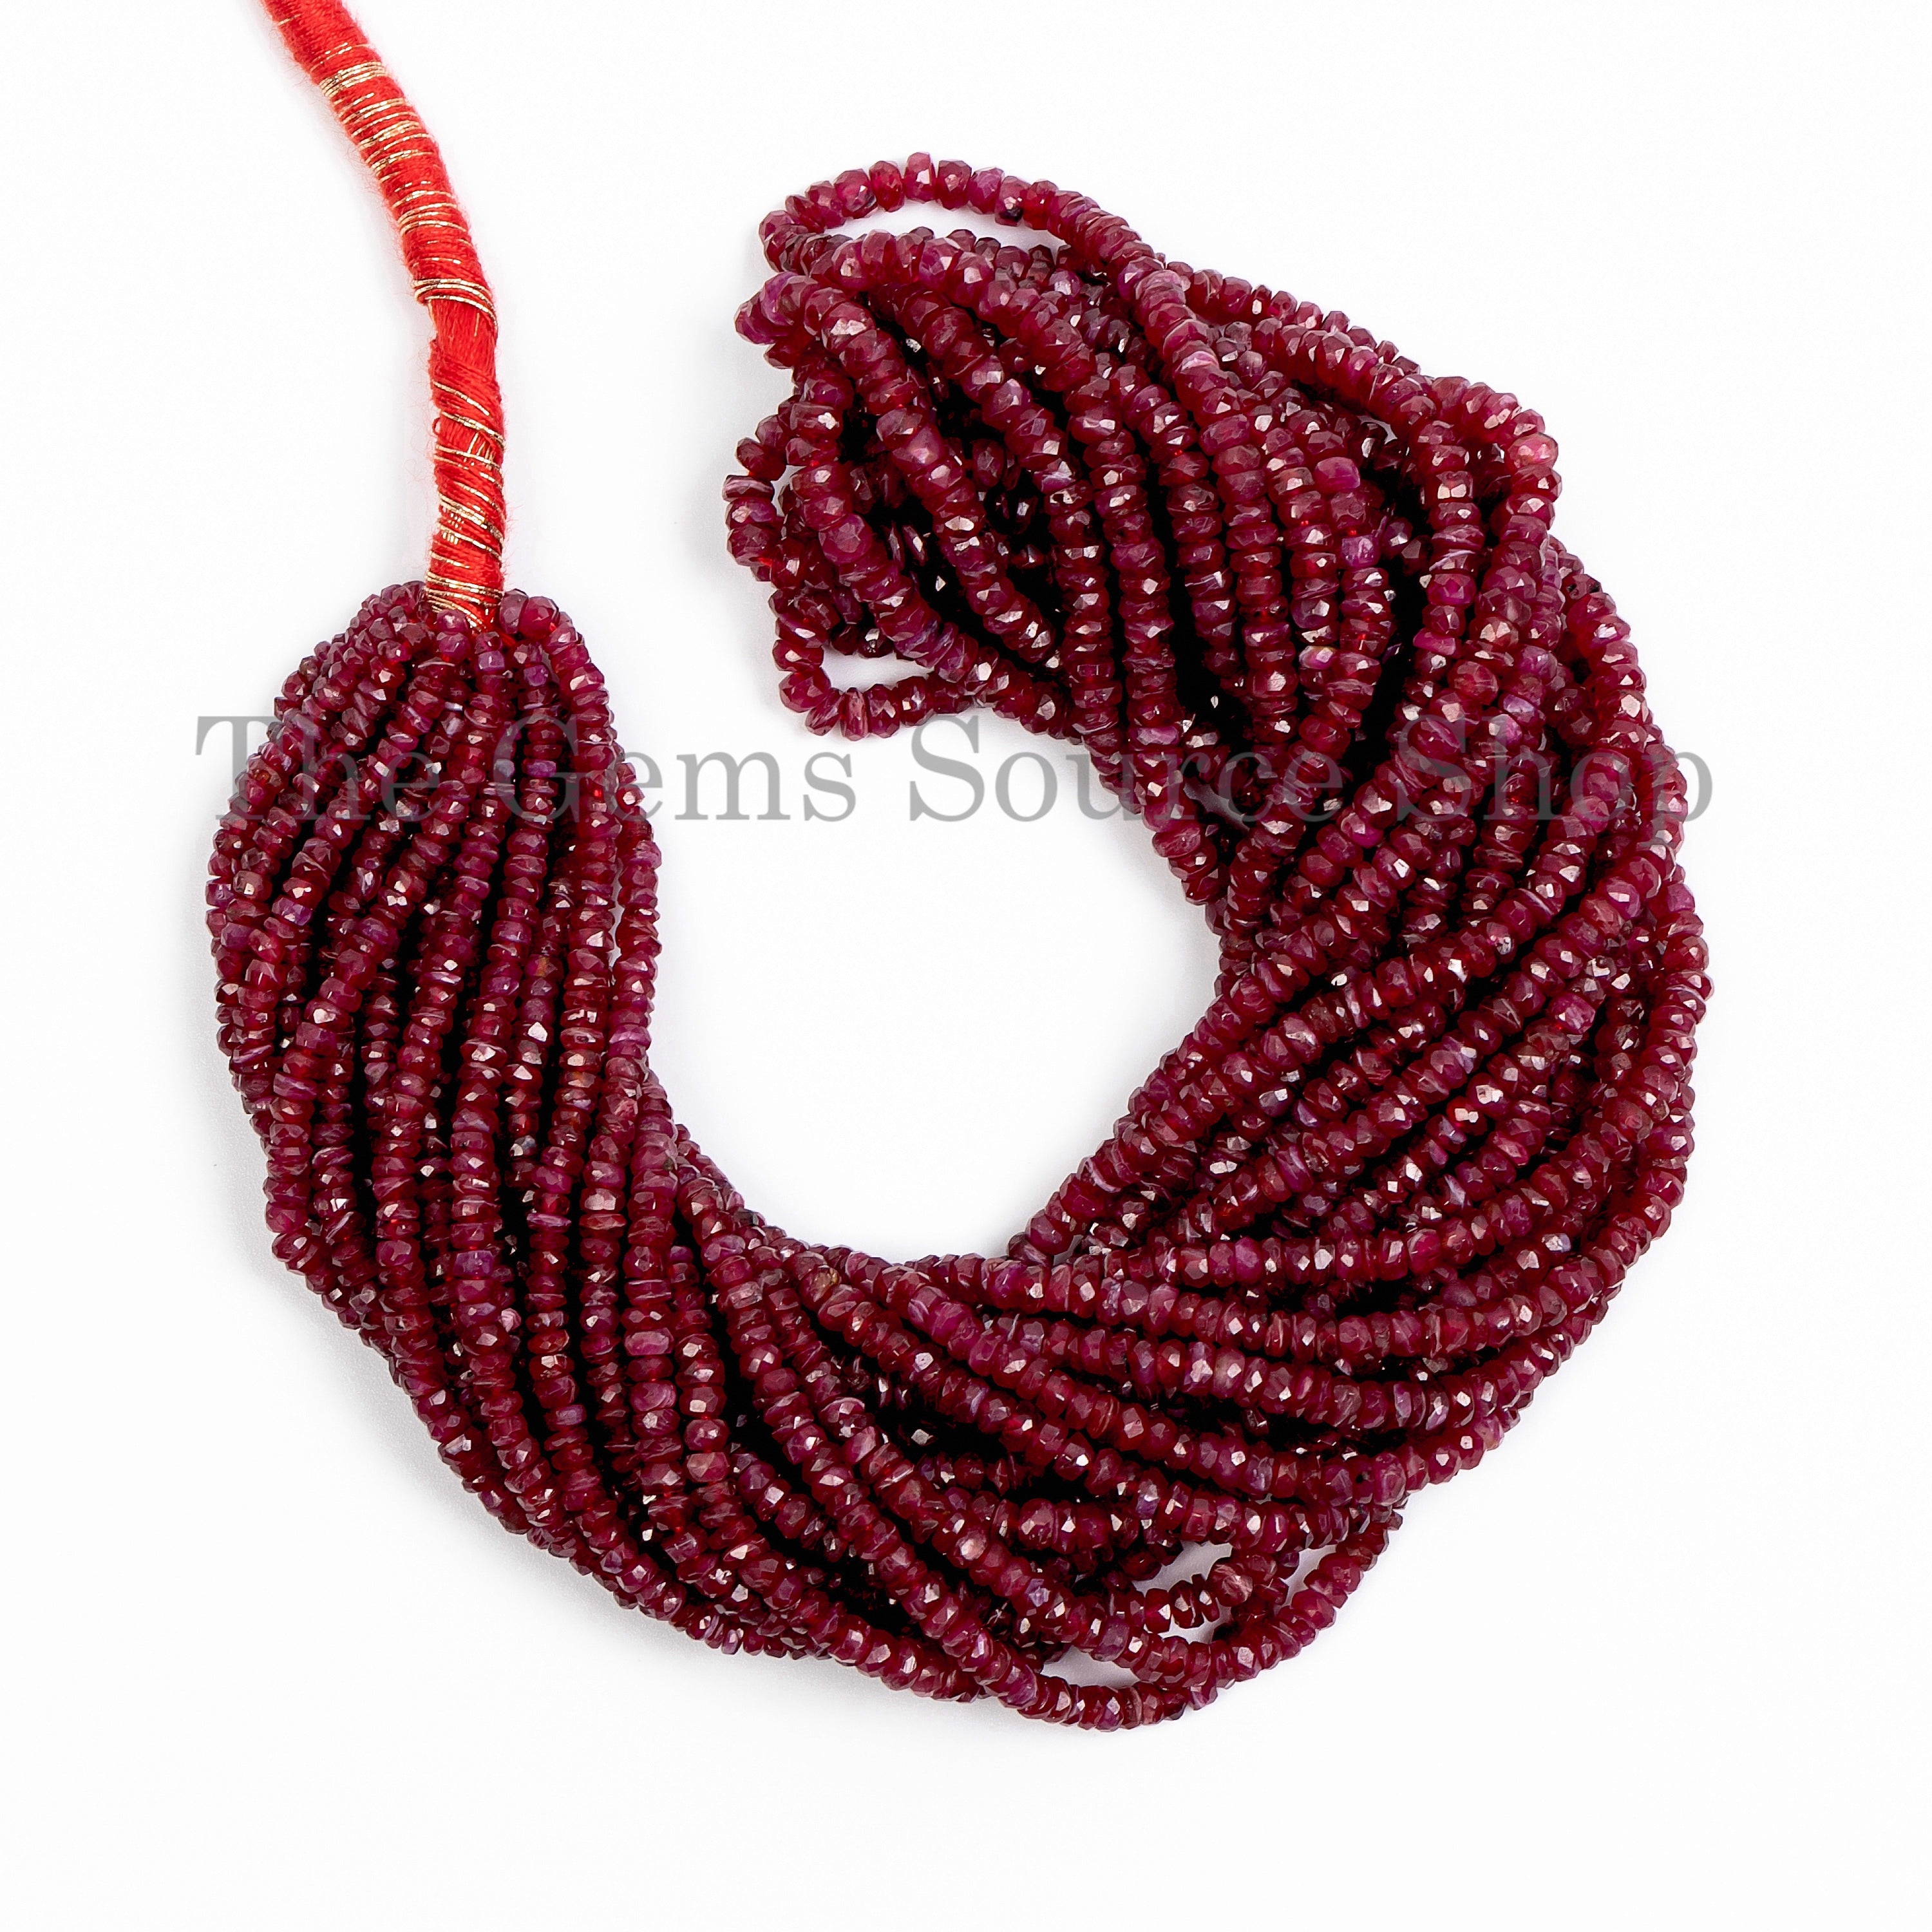 Natural ruby faceted rondelle beads, 2.5-3.5mm ruby faceted round beads for jewelry making, TGS-5048